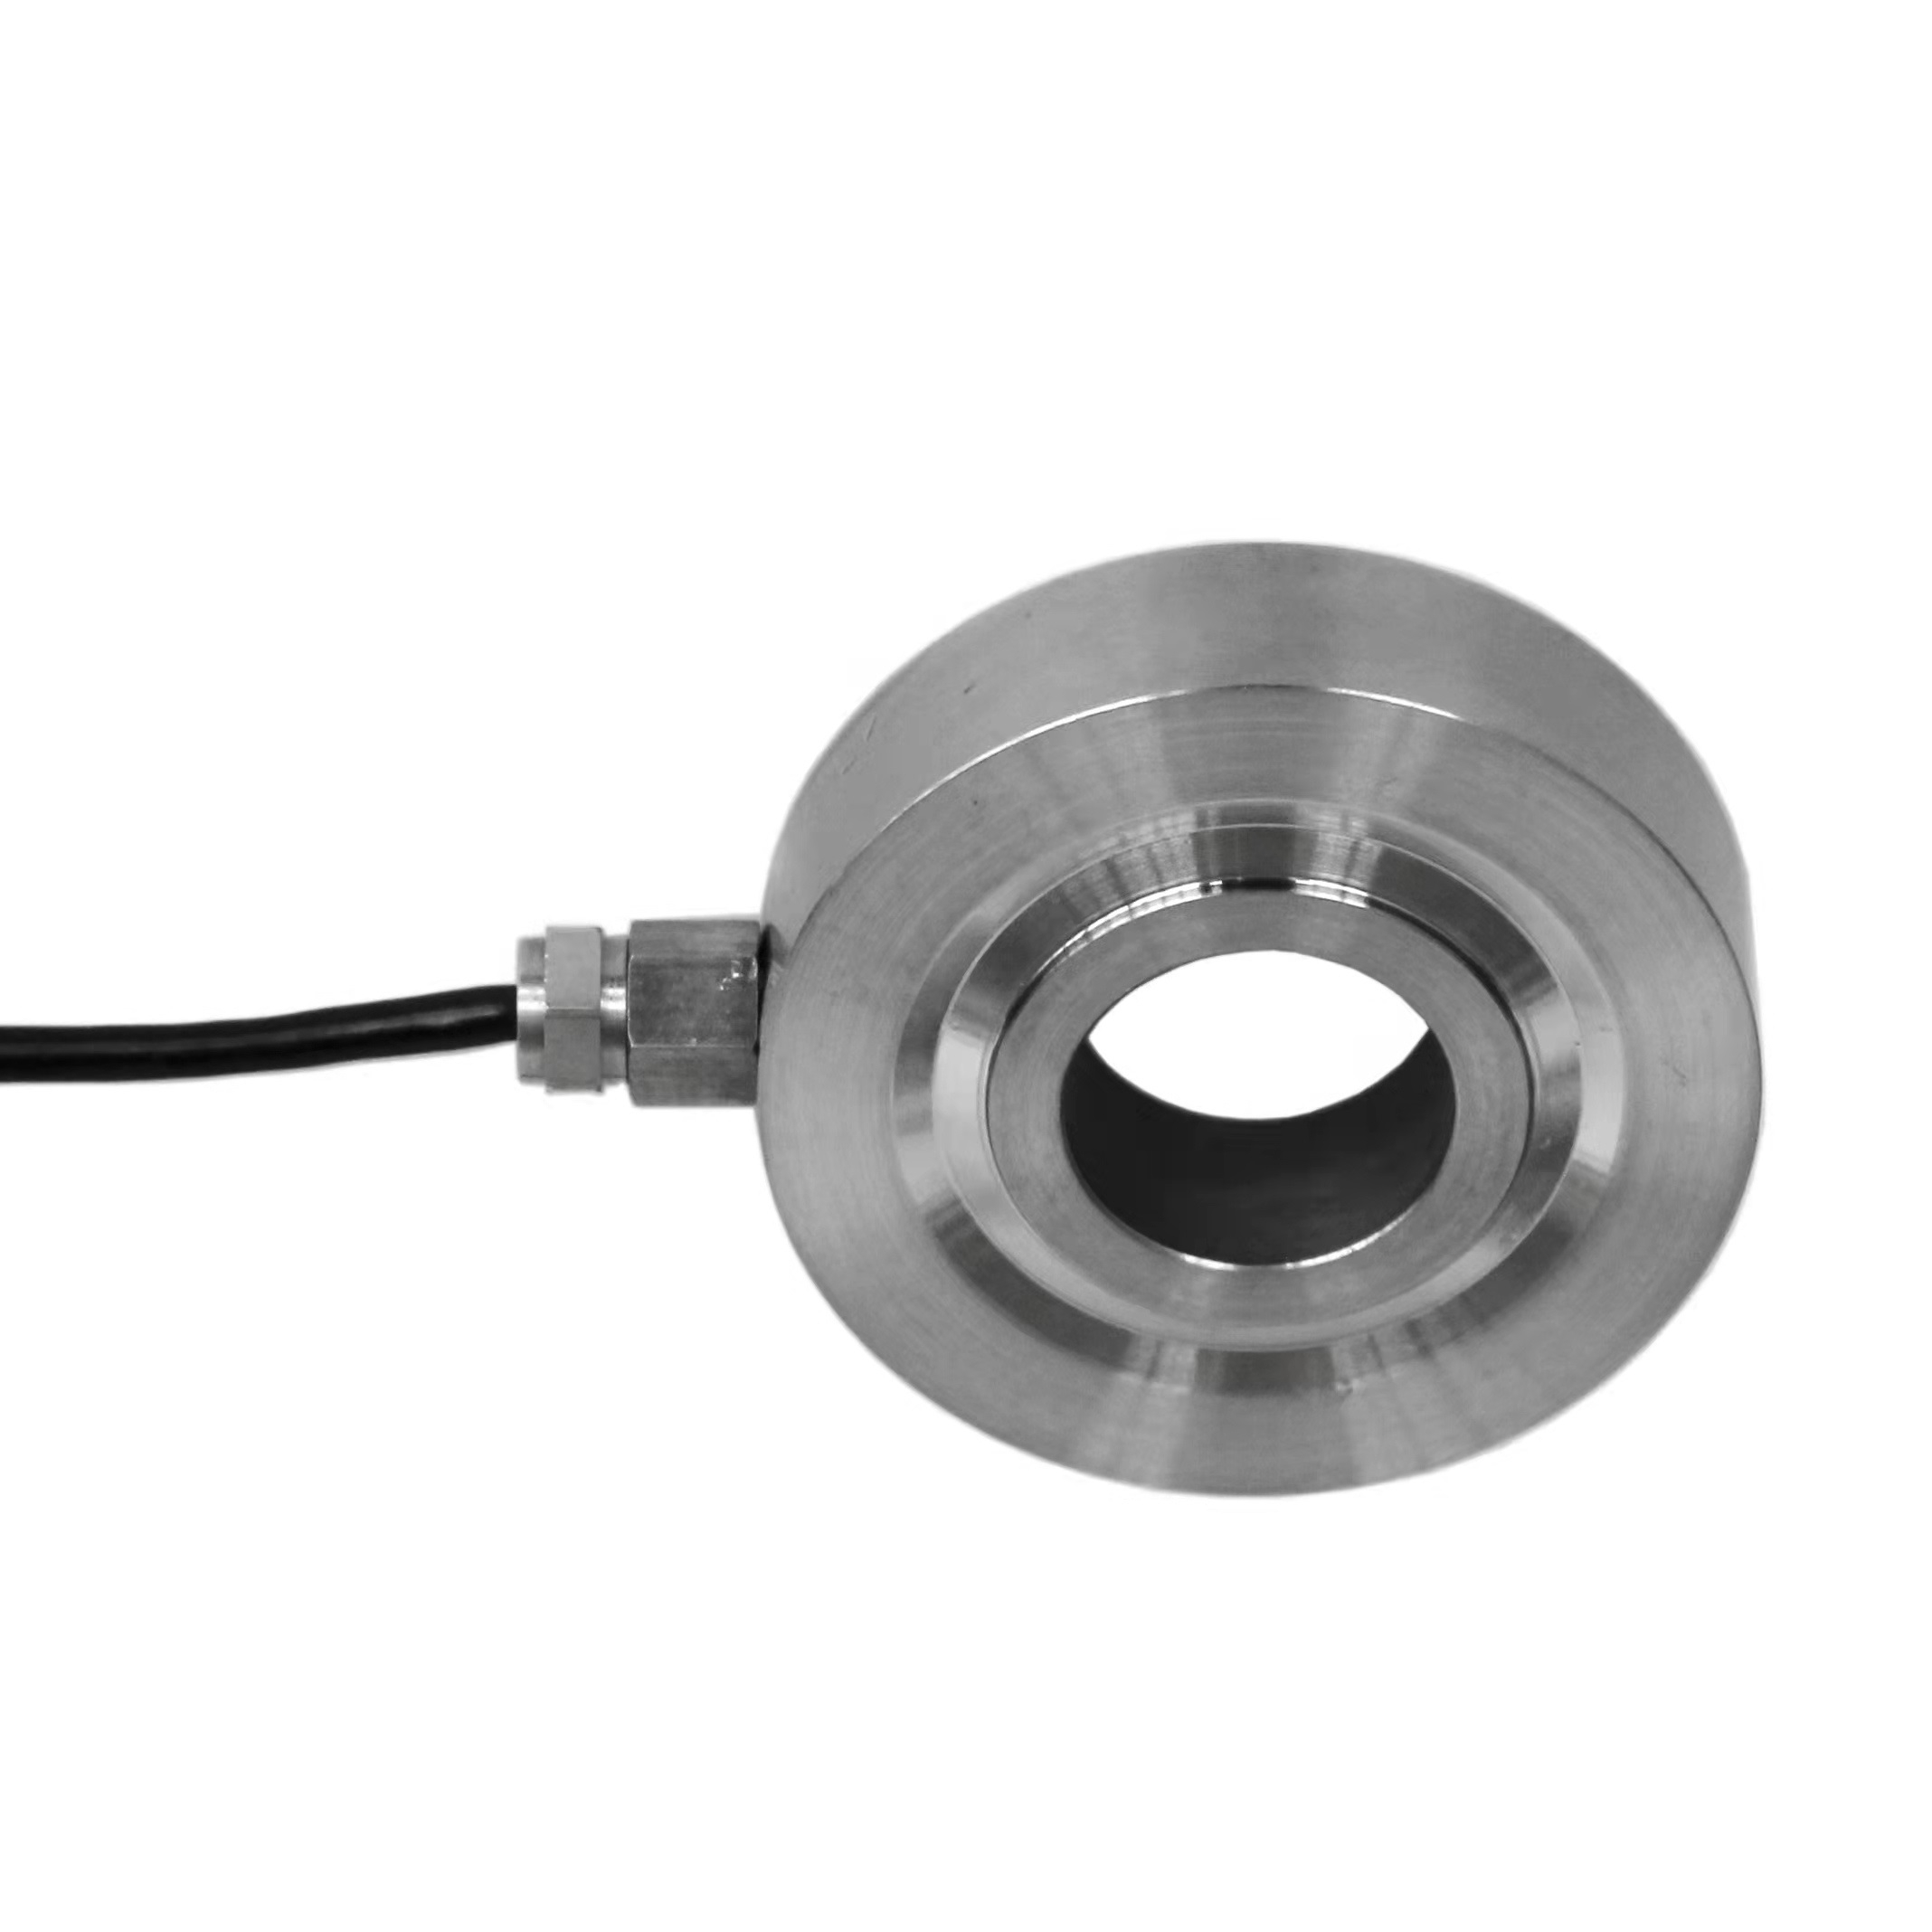 Low Profile Miniature Donut Washer Type Load Cell